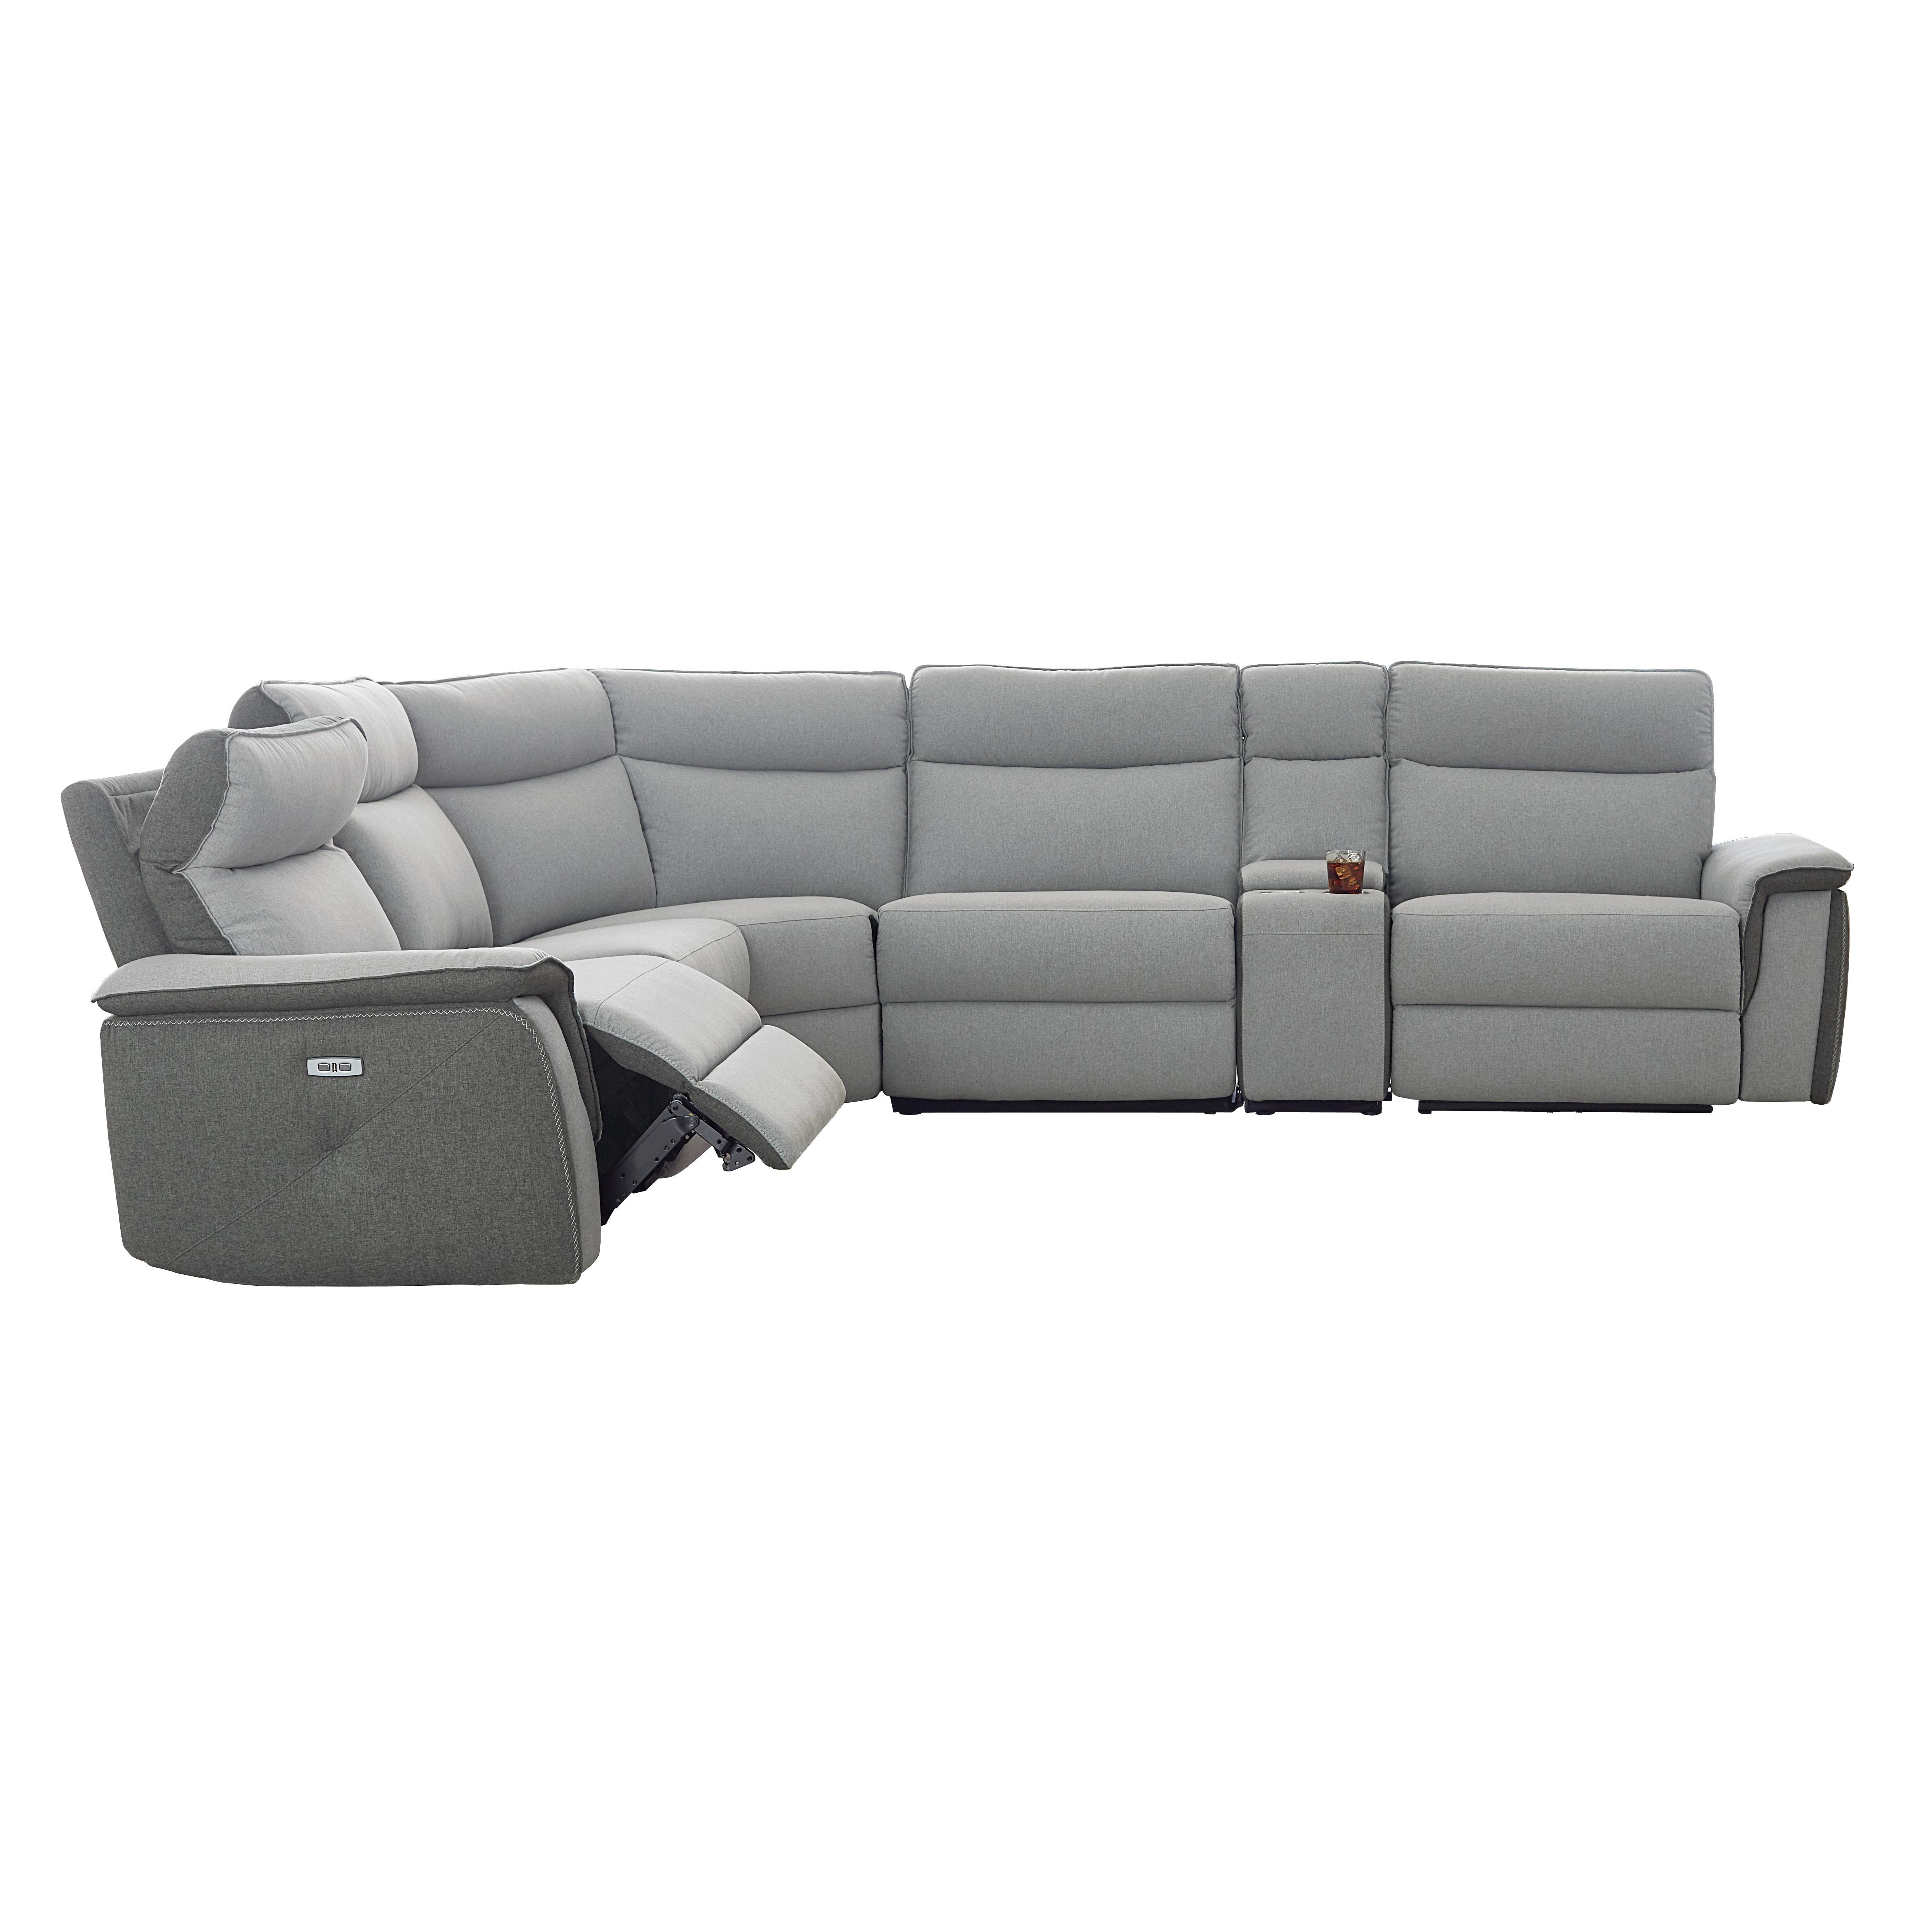 

    
Homelegance 8259*6SCPWH Maroni Power Reclining Sectional Gray 8259*6SCPWH
